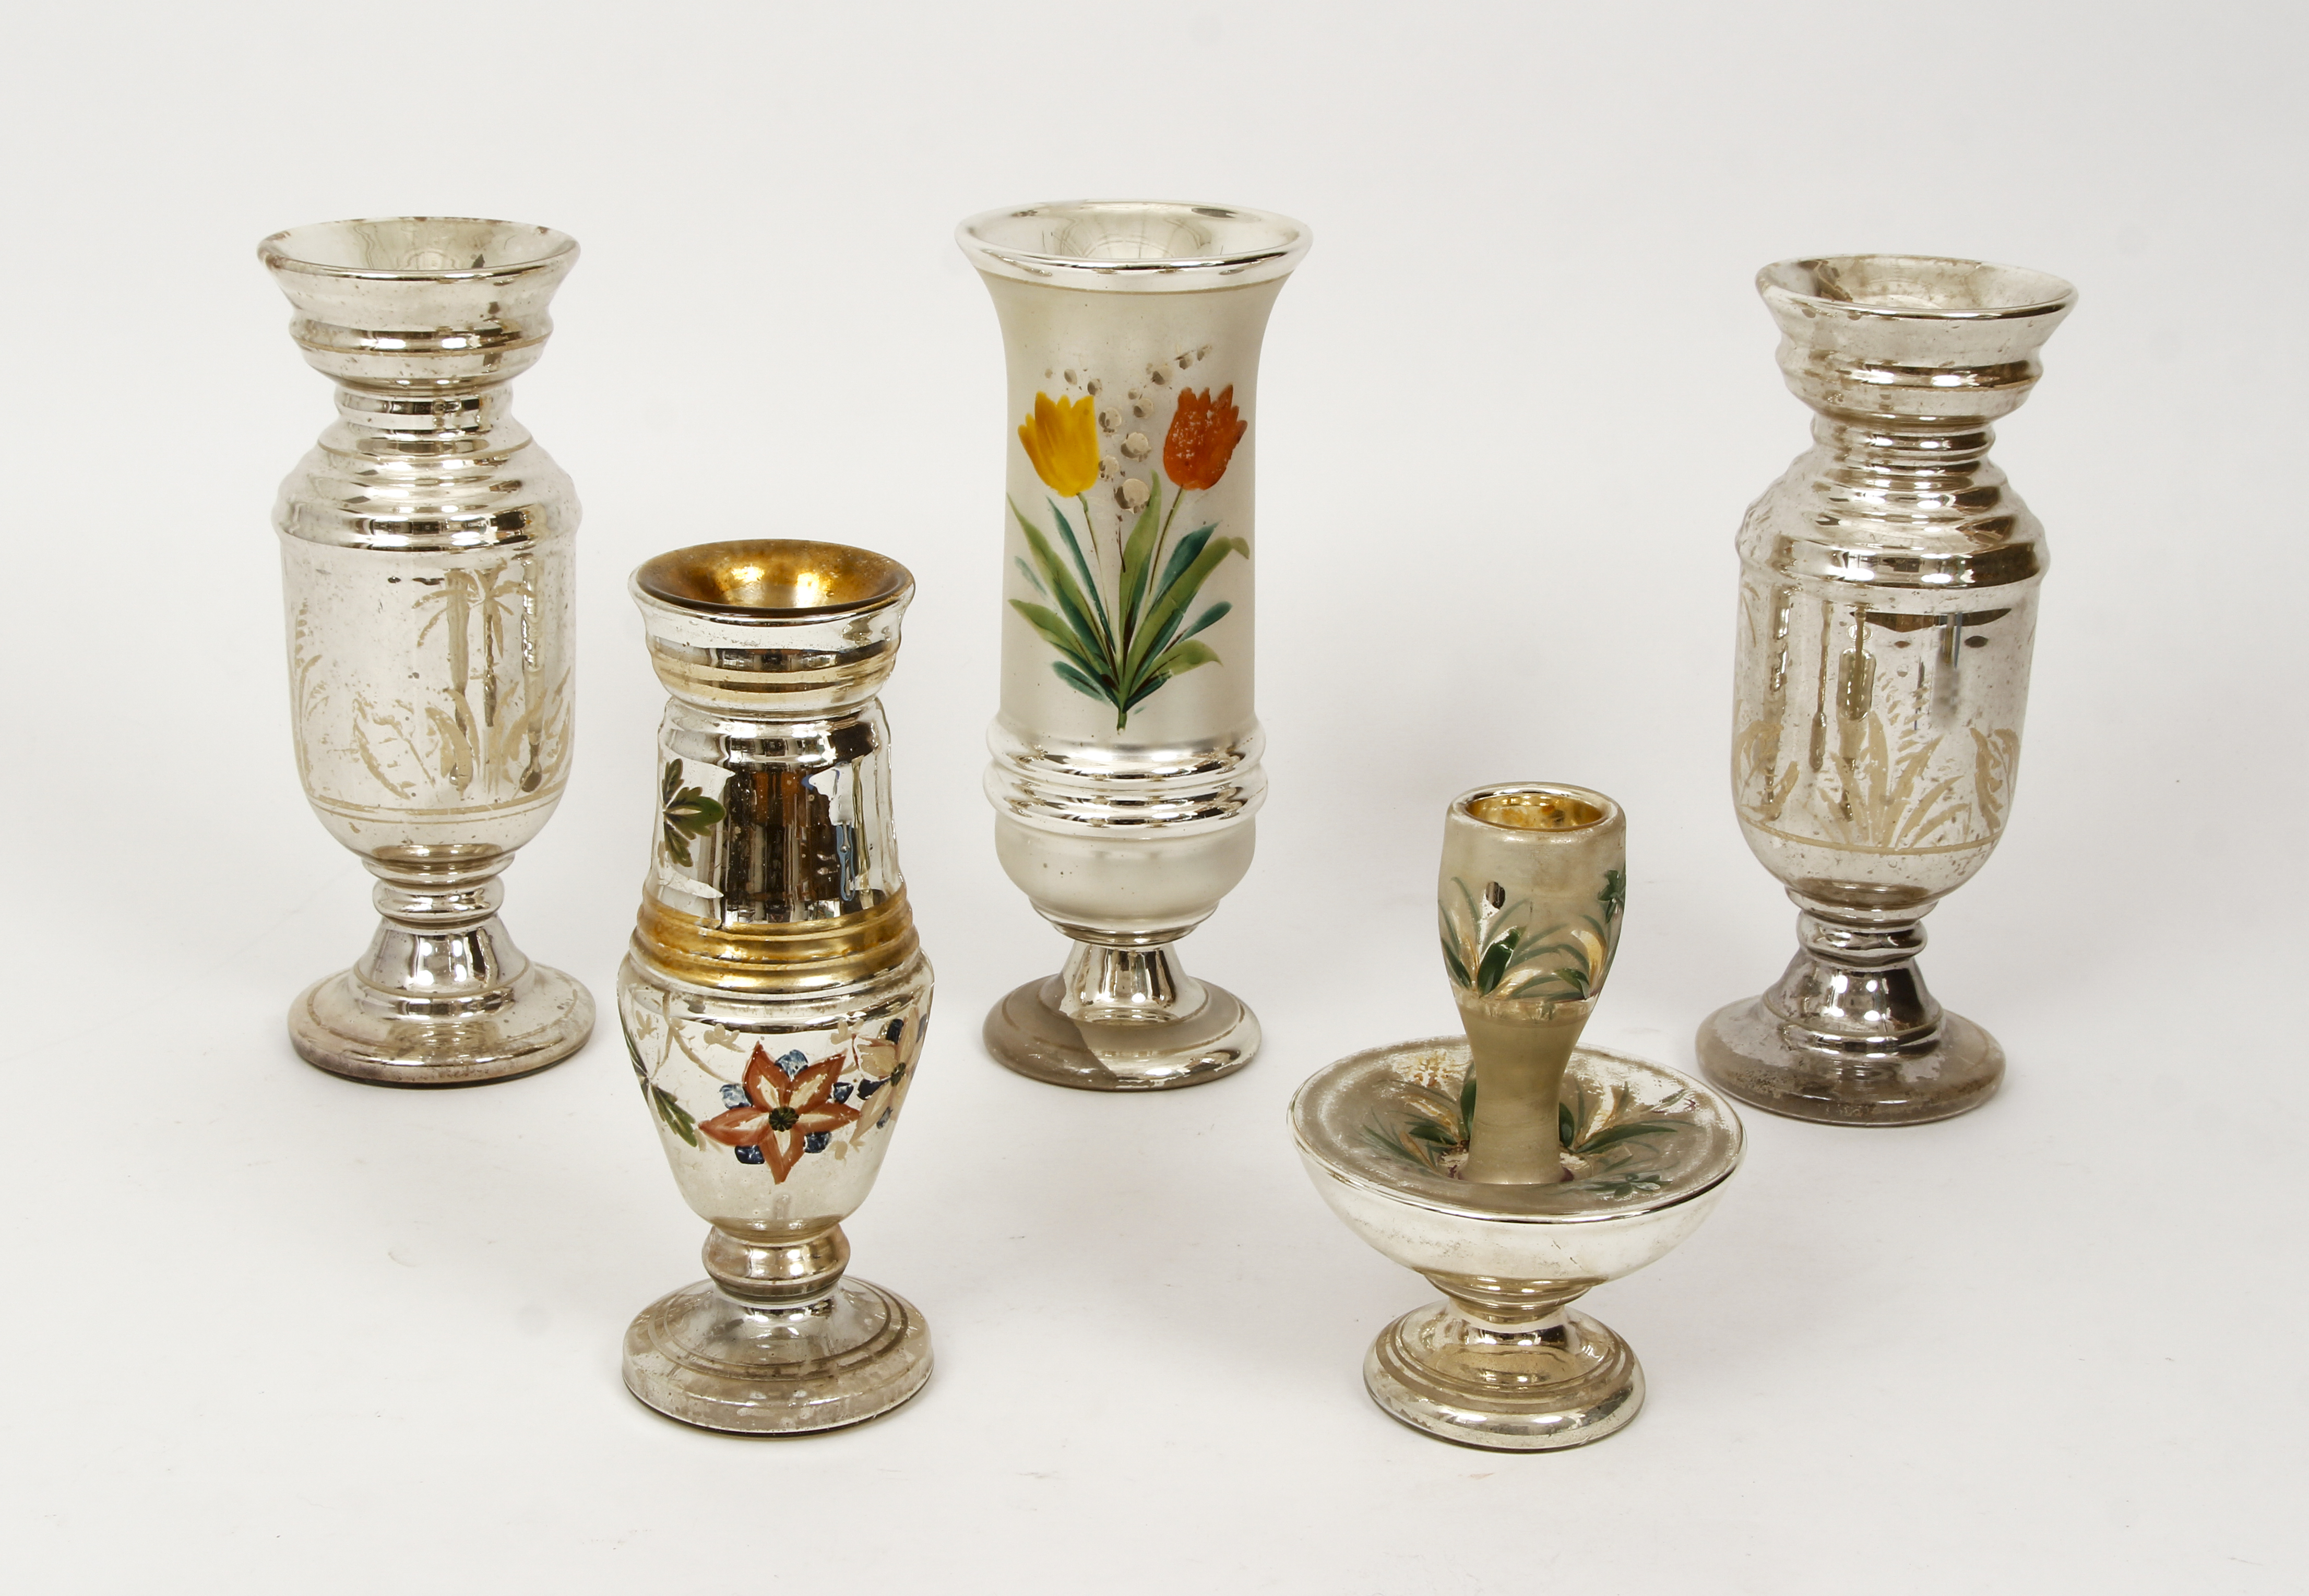 5 Mercury Glass objects with painted decoration